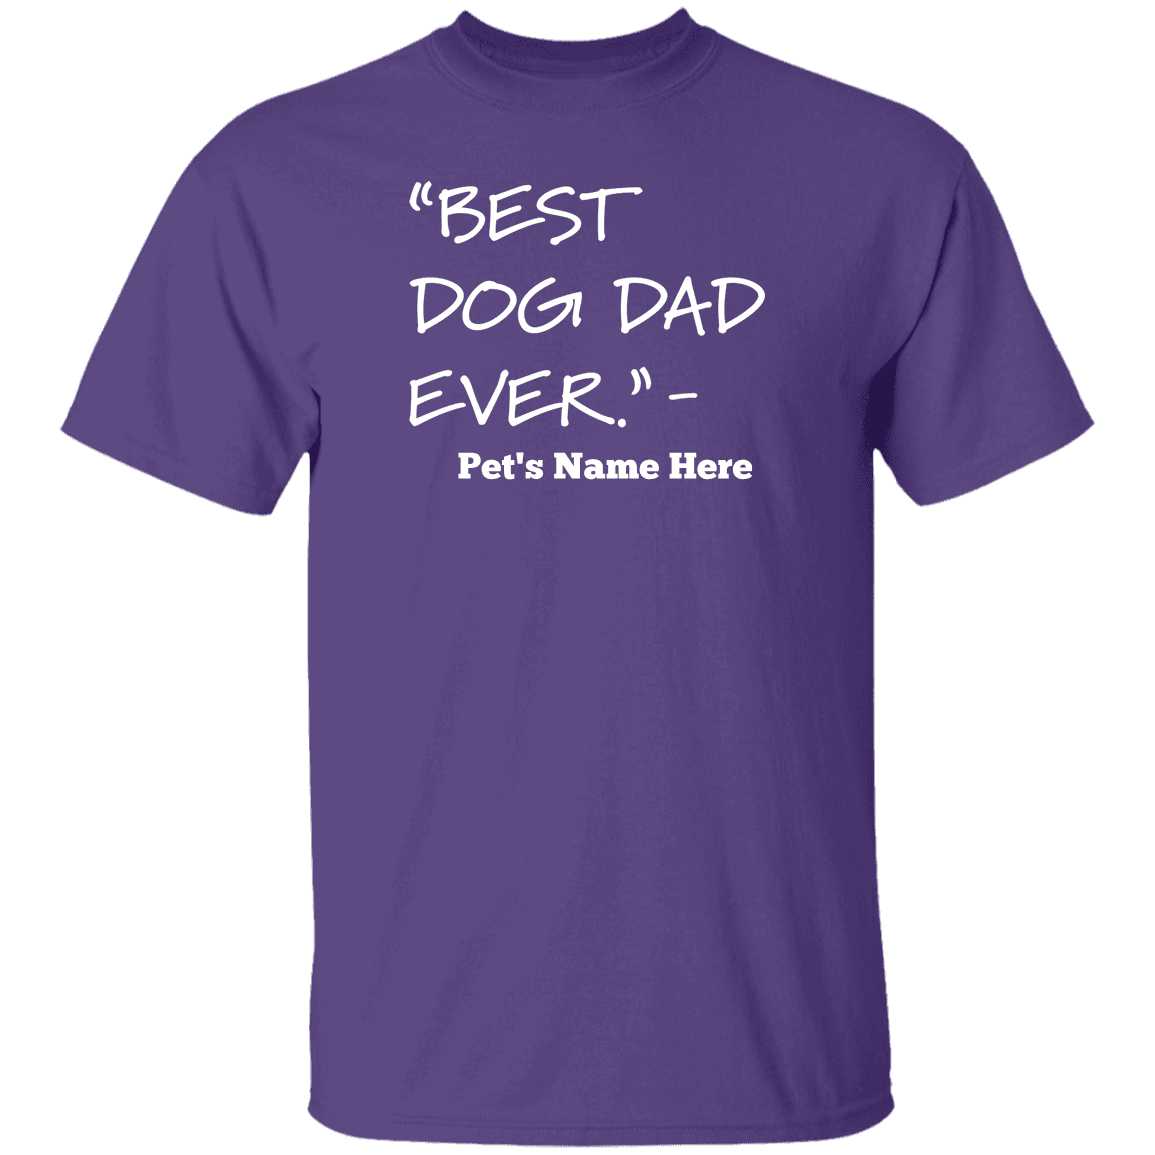 Personalized Best Dog Dad Ever - T Shirt.